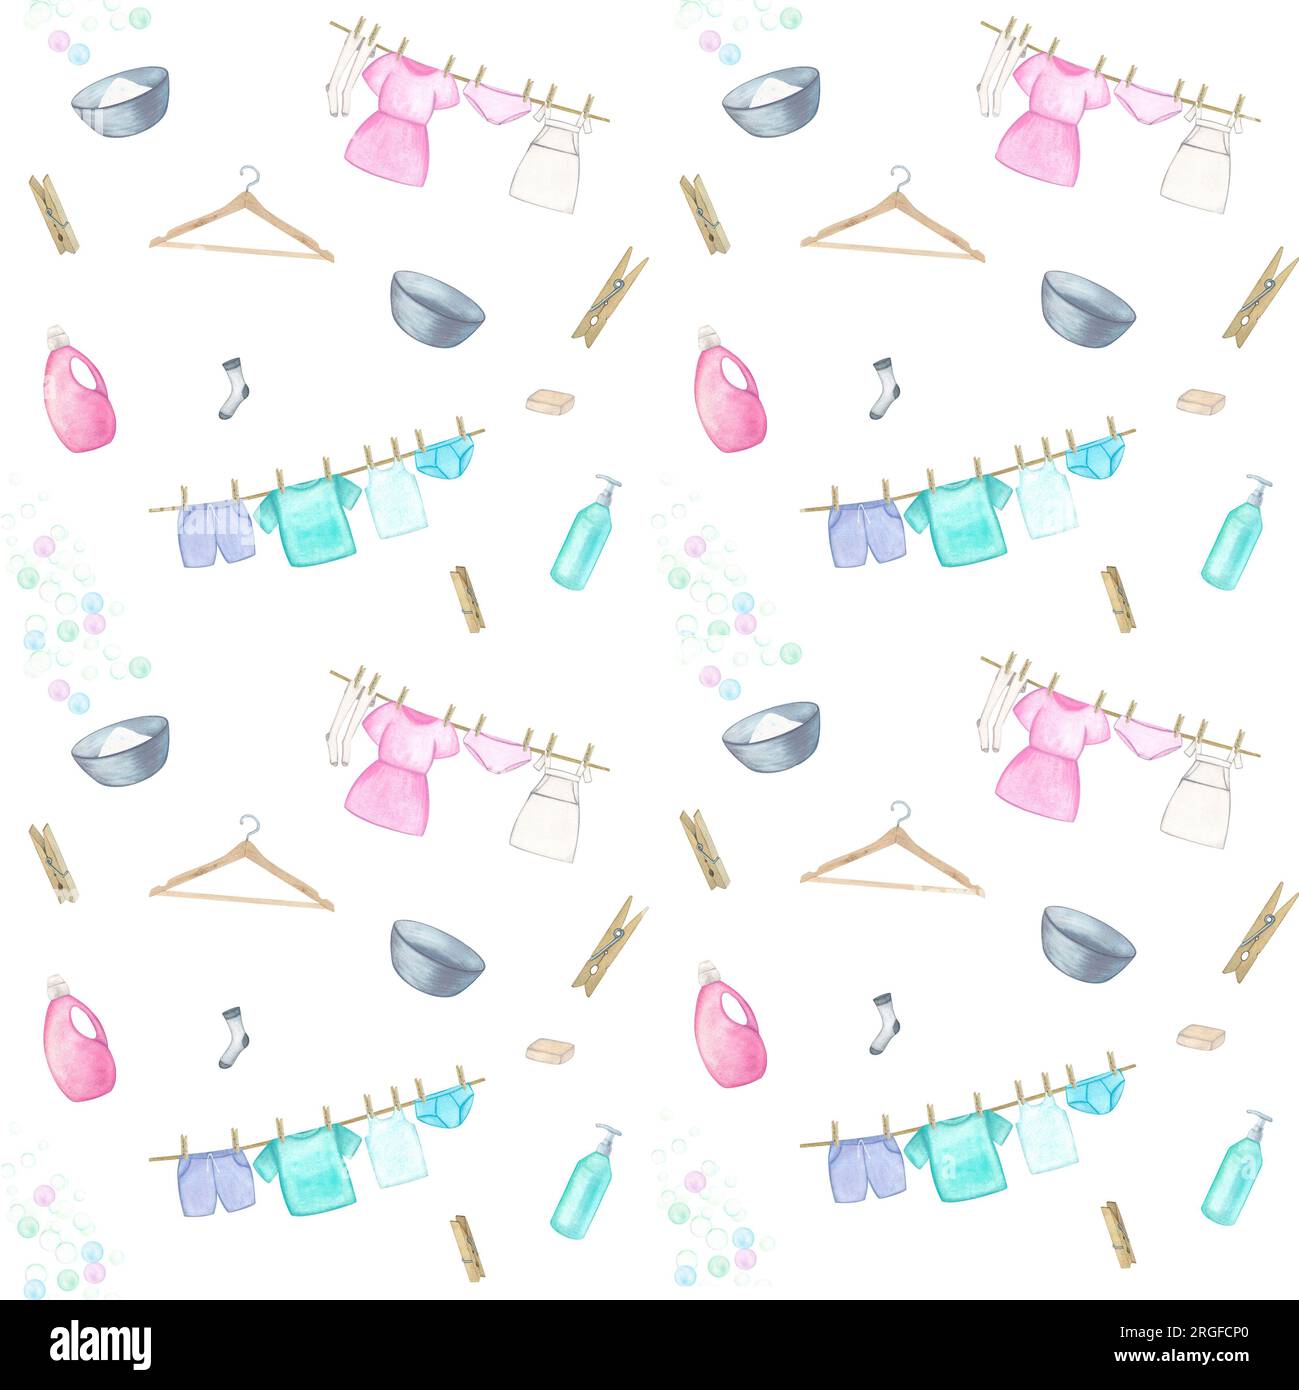 Laundry. Seamless pattern with basin, washing gel powder soap linen, clothes, hanger, clothespins, bubbles. Watercolor illustration on a white backgro Stock Photo